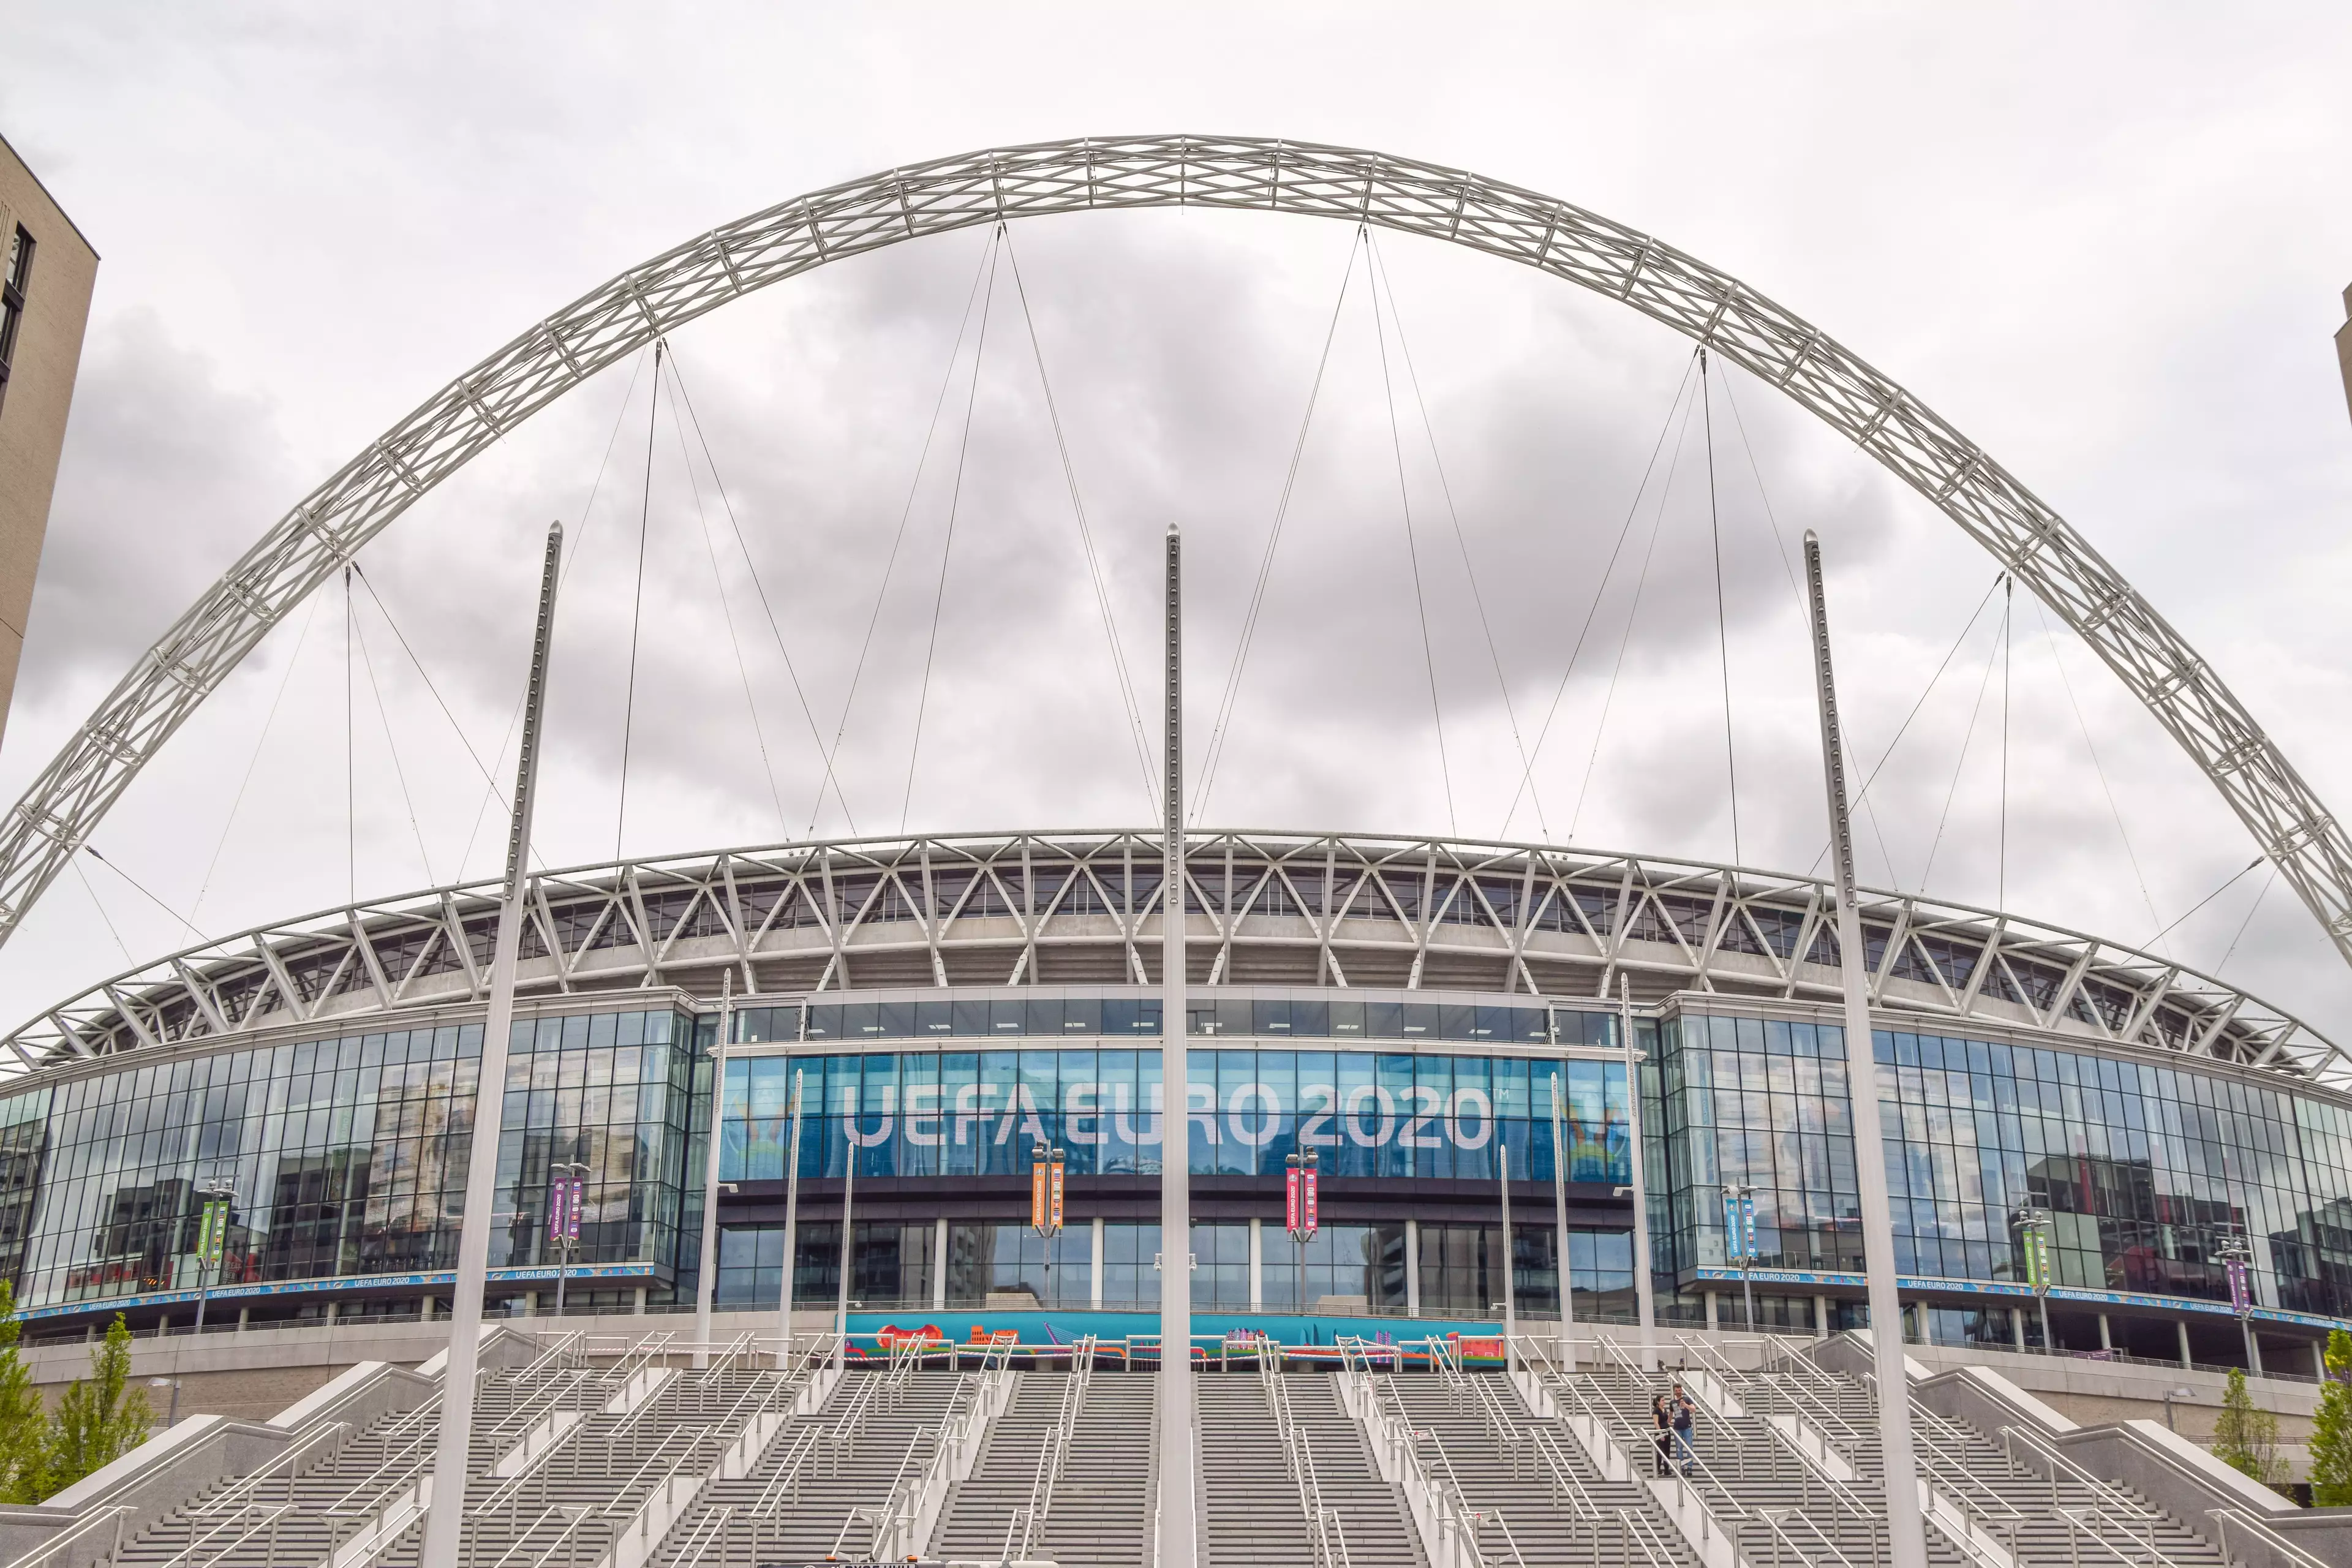 Wembley played host to England's first Euro 2020 match.